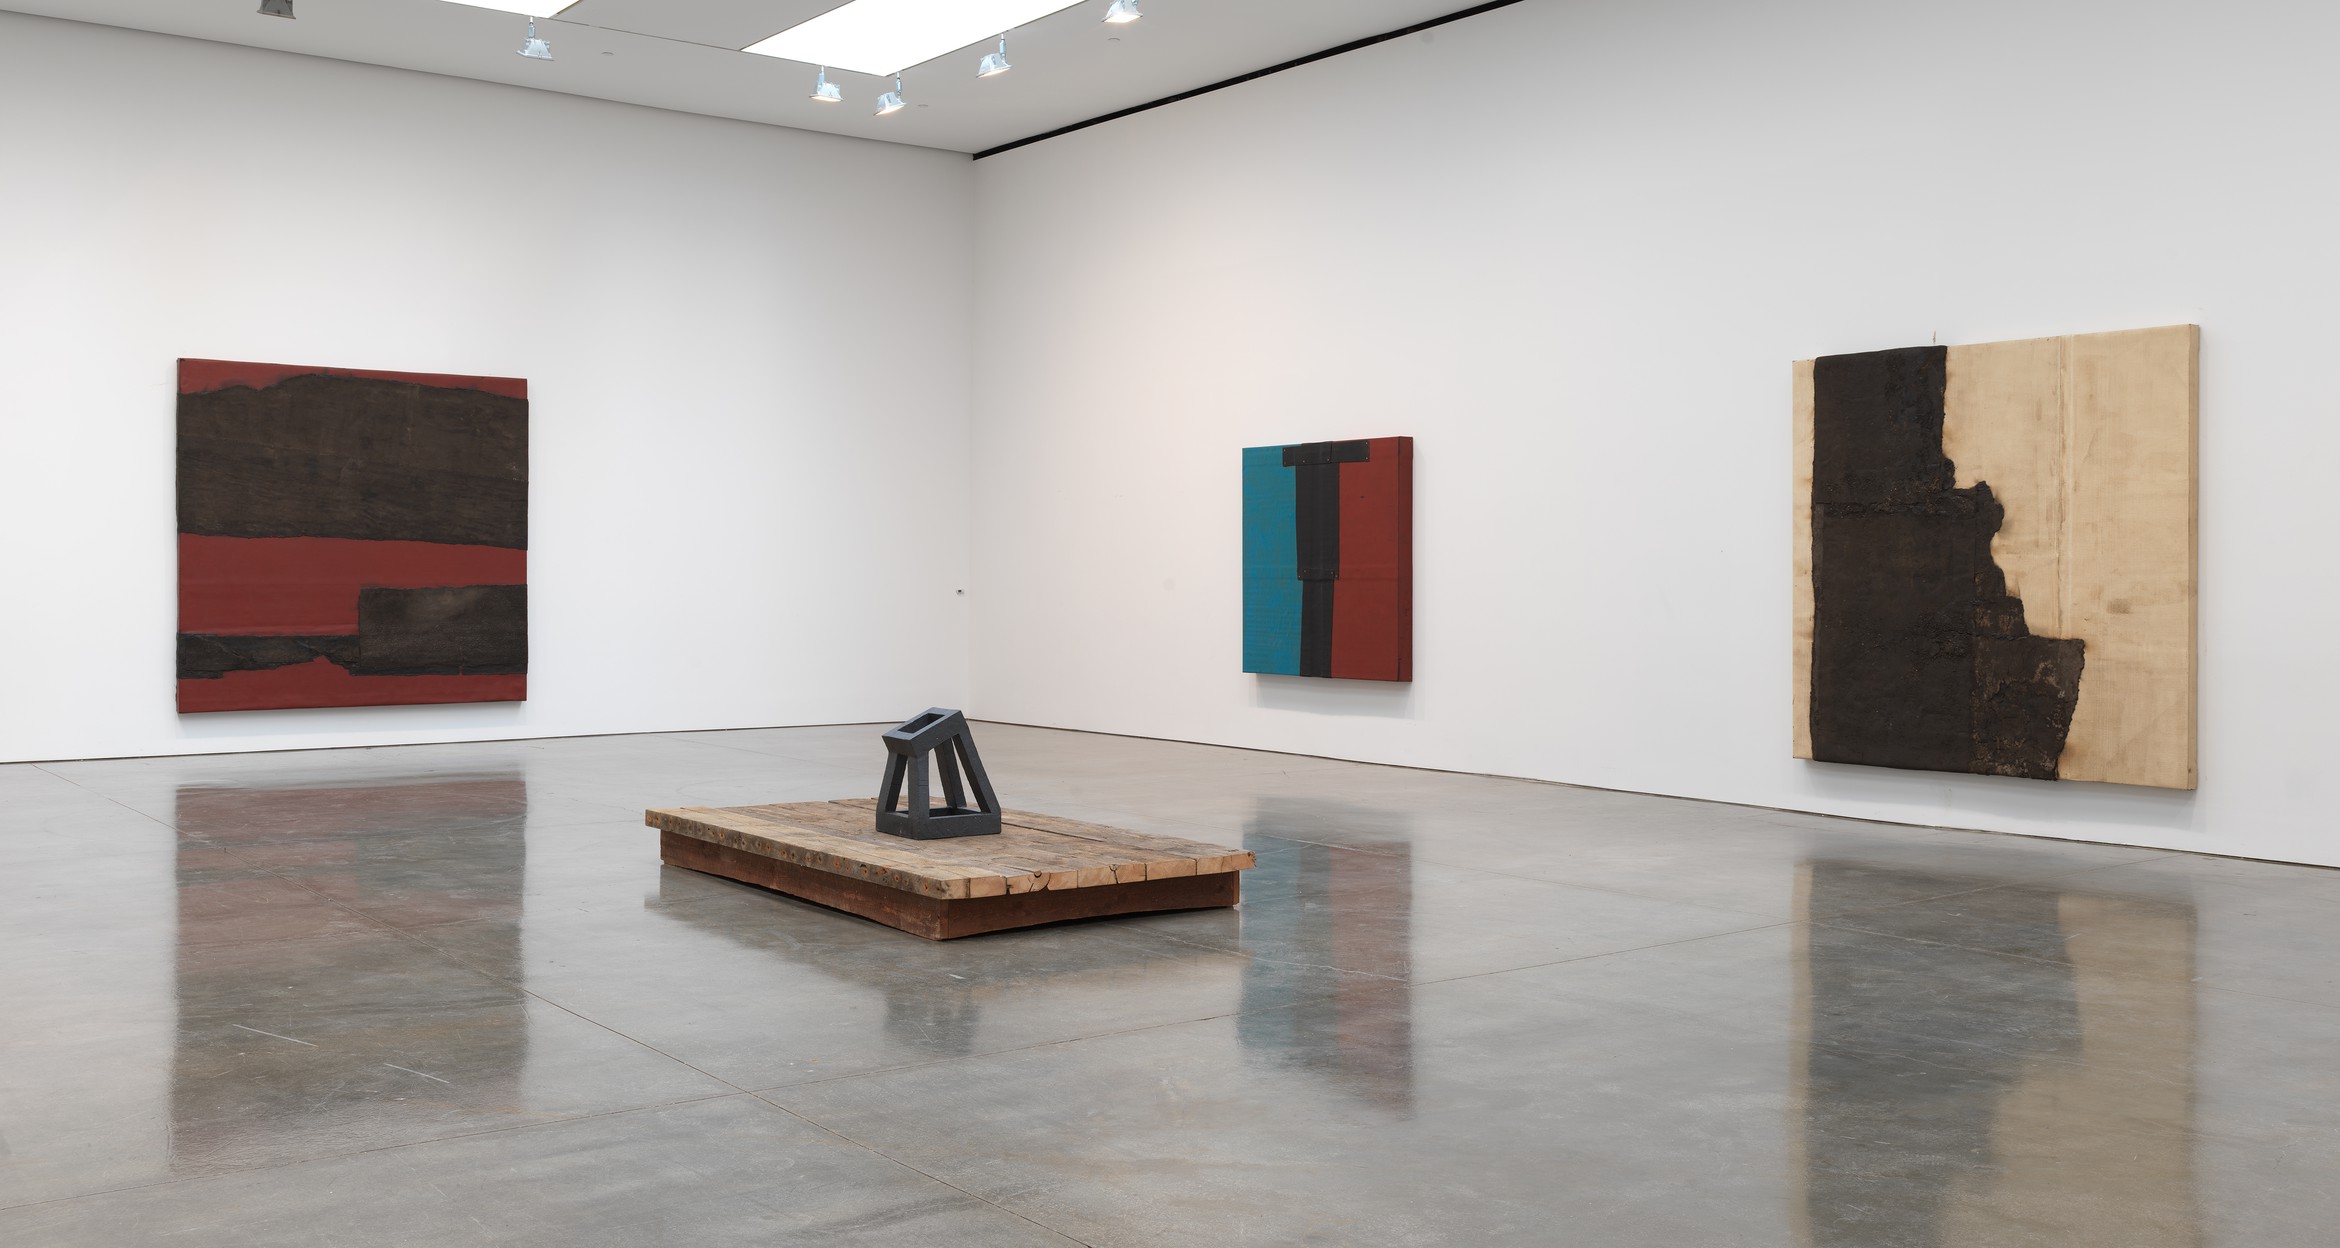 Black Vessel at the Gagosian, New York. Artworks by Theaster Gates, photos by Rob McKeever. Image courtesy of Gagosian